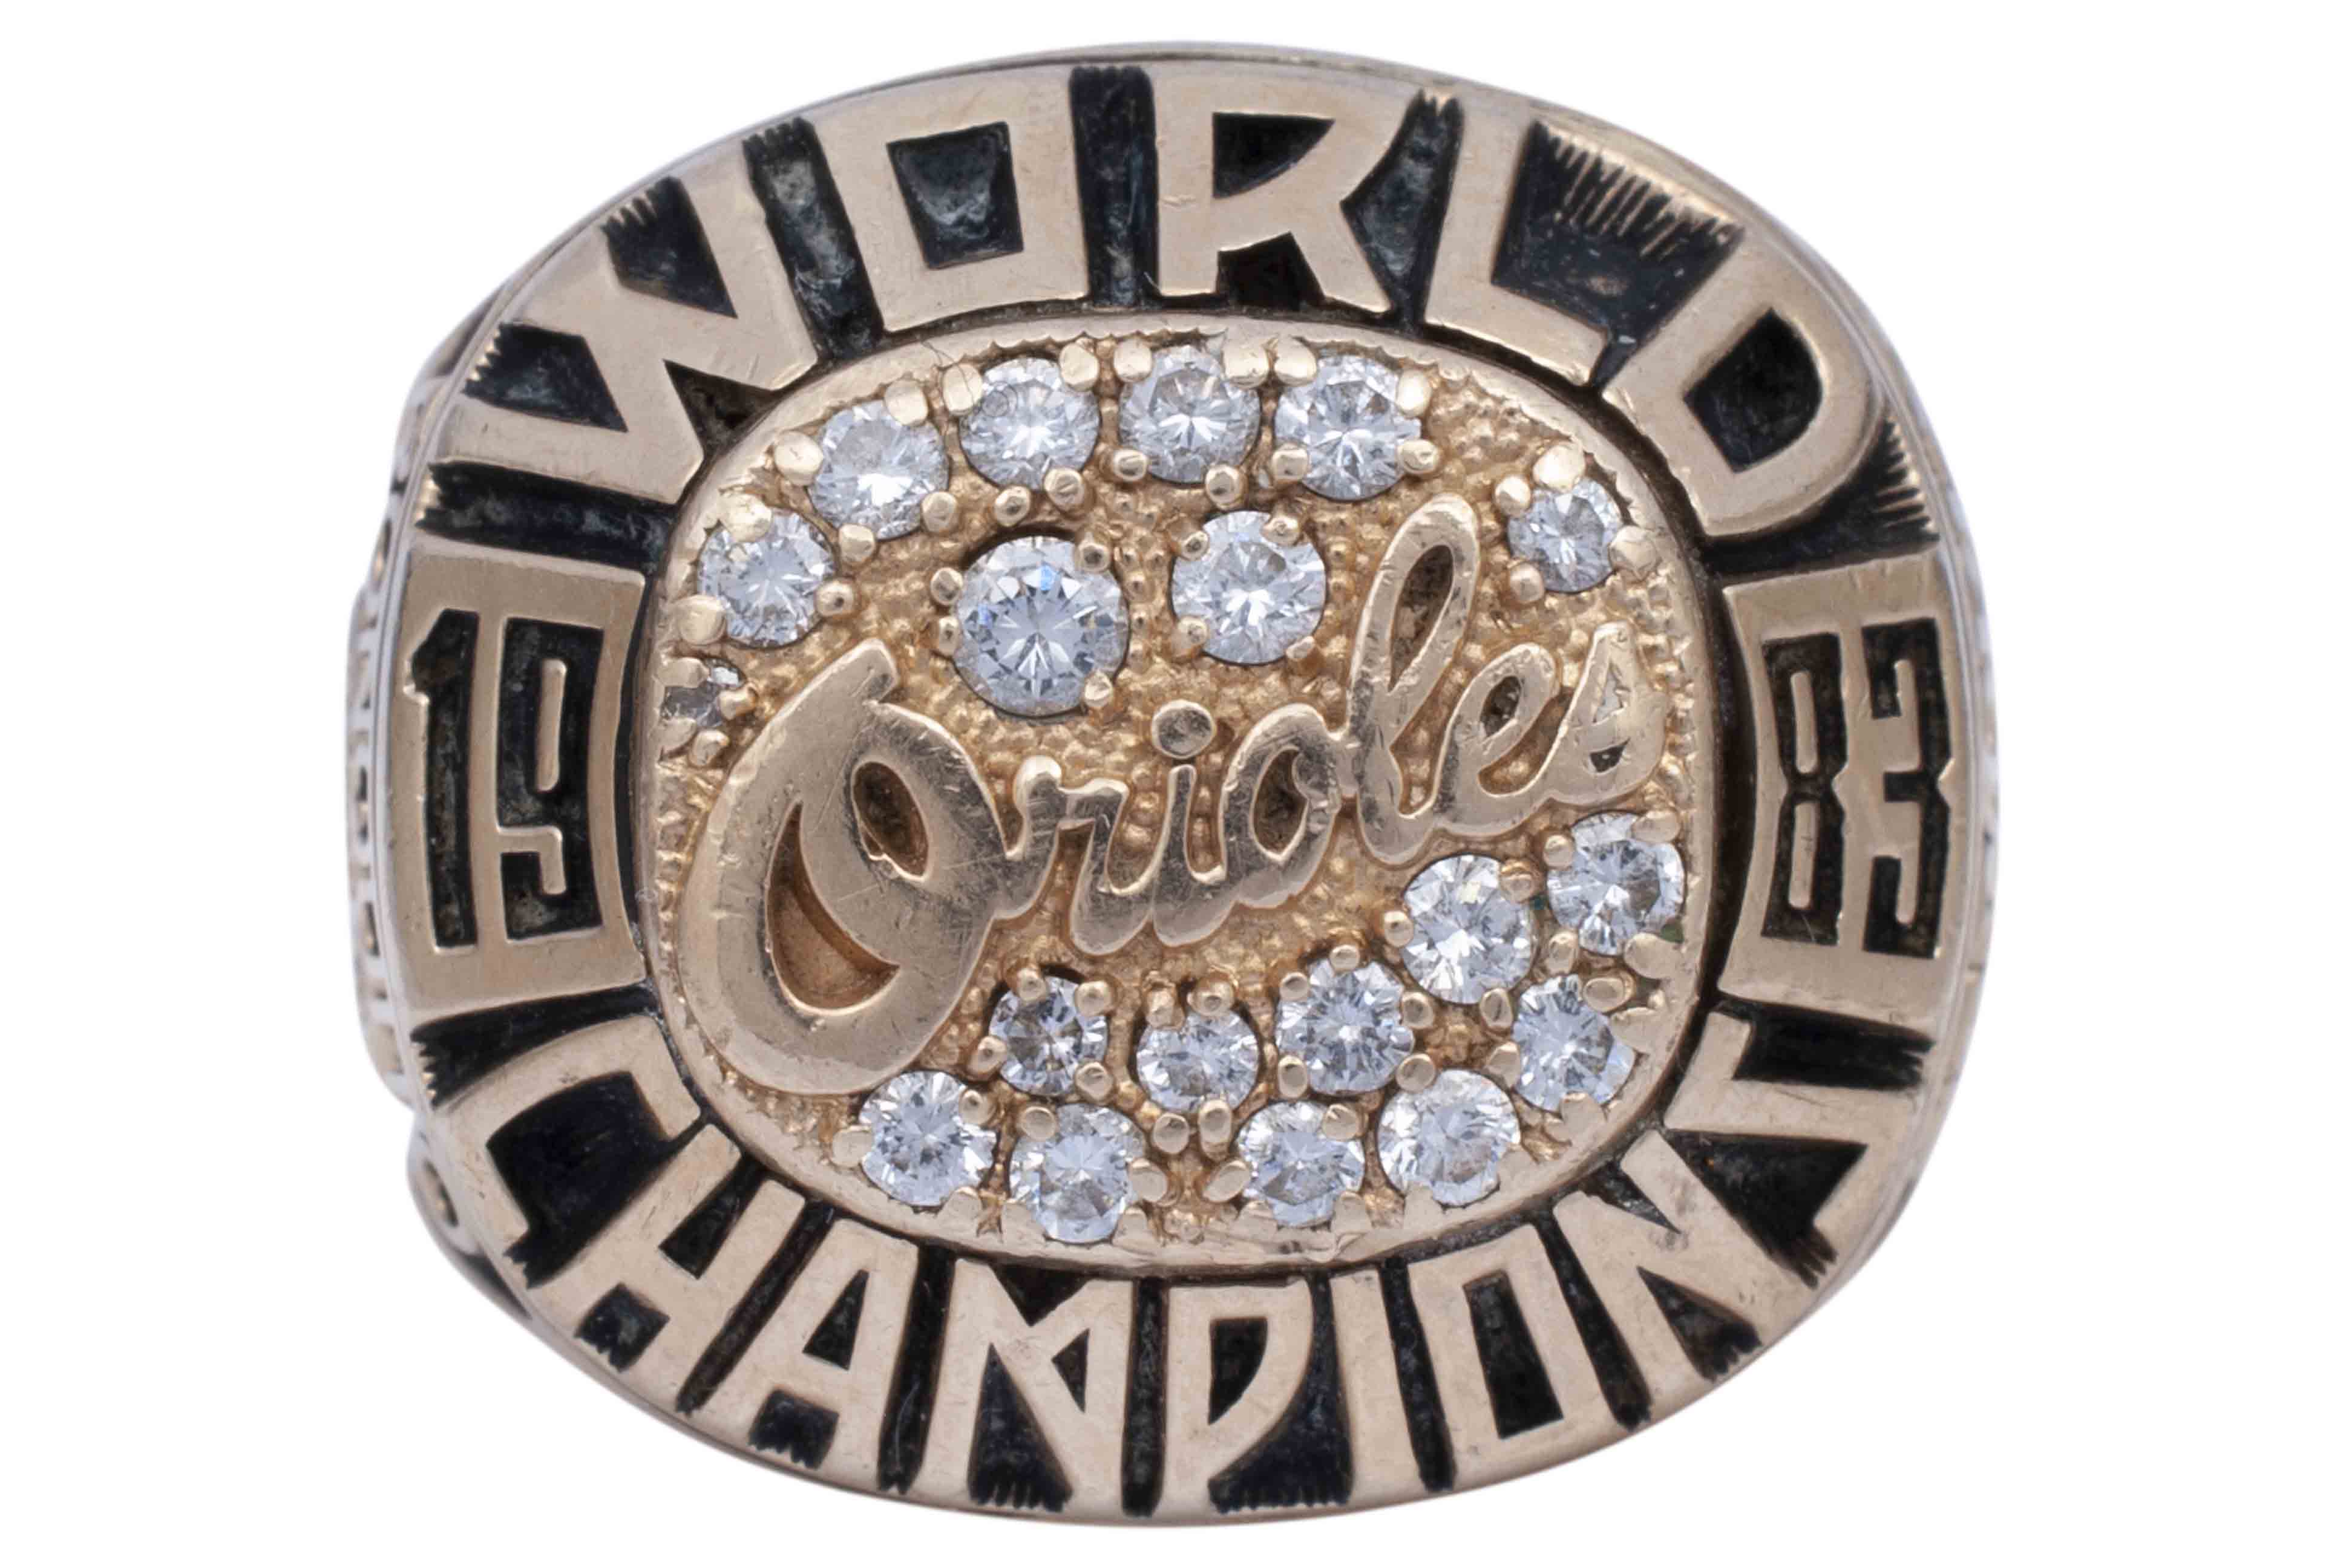 Lot Detail - 1983 BALTIMORE ORIOLES WORLD SERIES CHAMPIONSHIP 10K GOLD RING  PRESENTED TO SCOUT RONQUITO